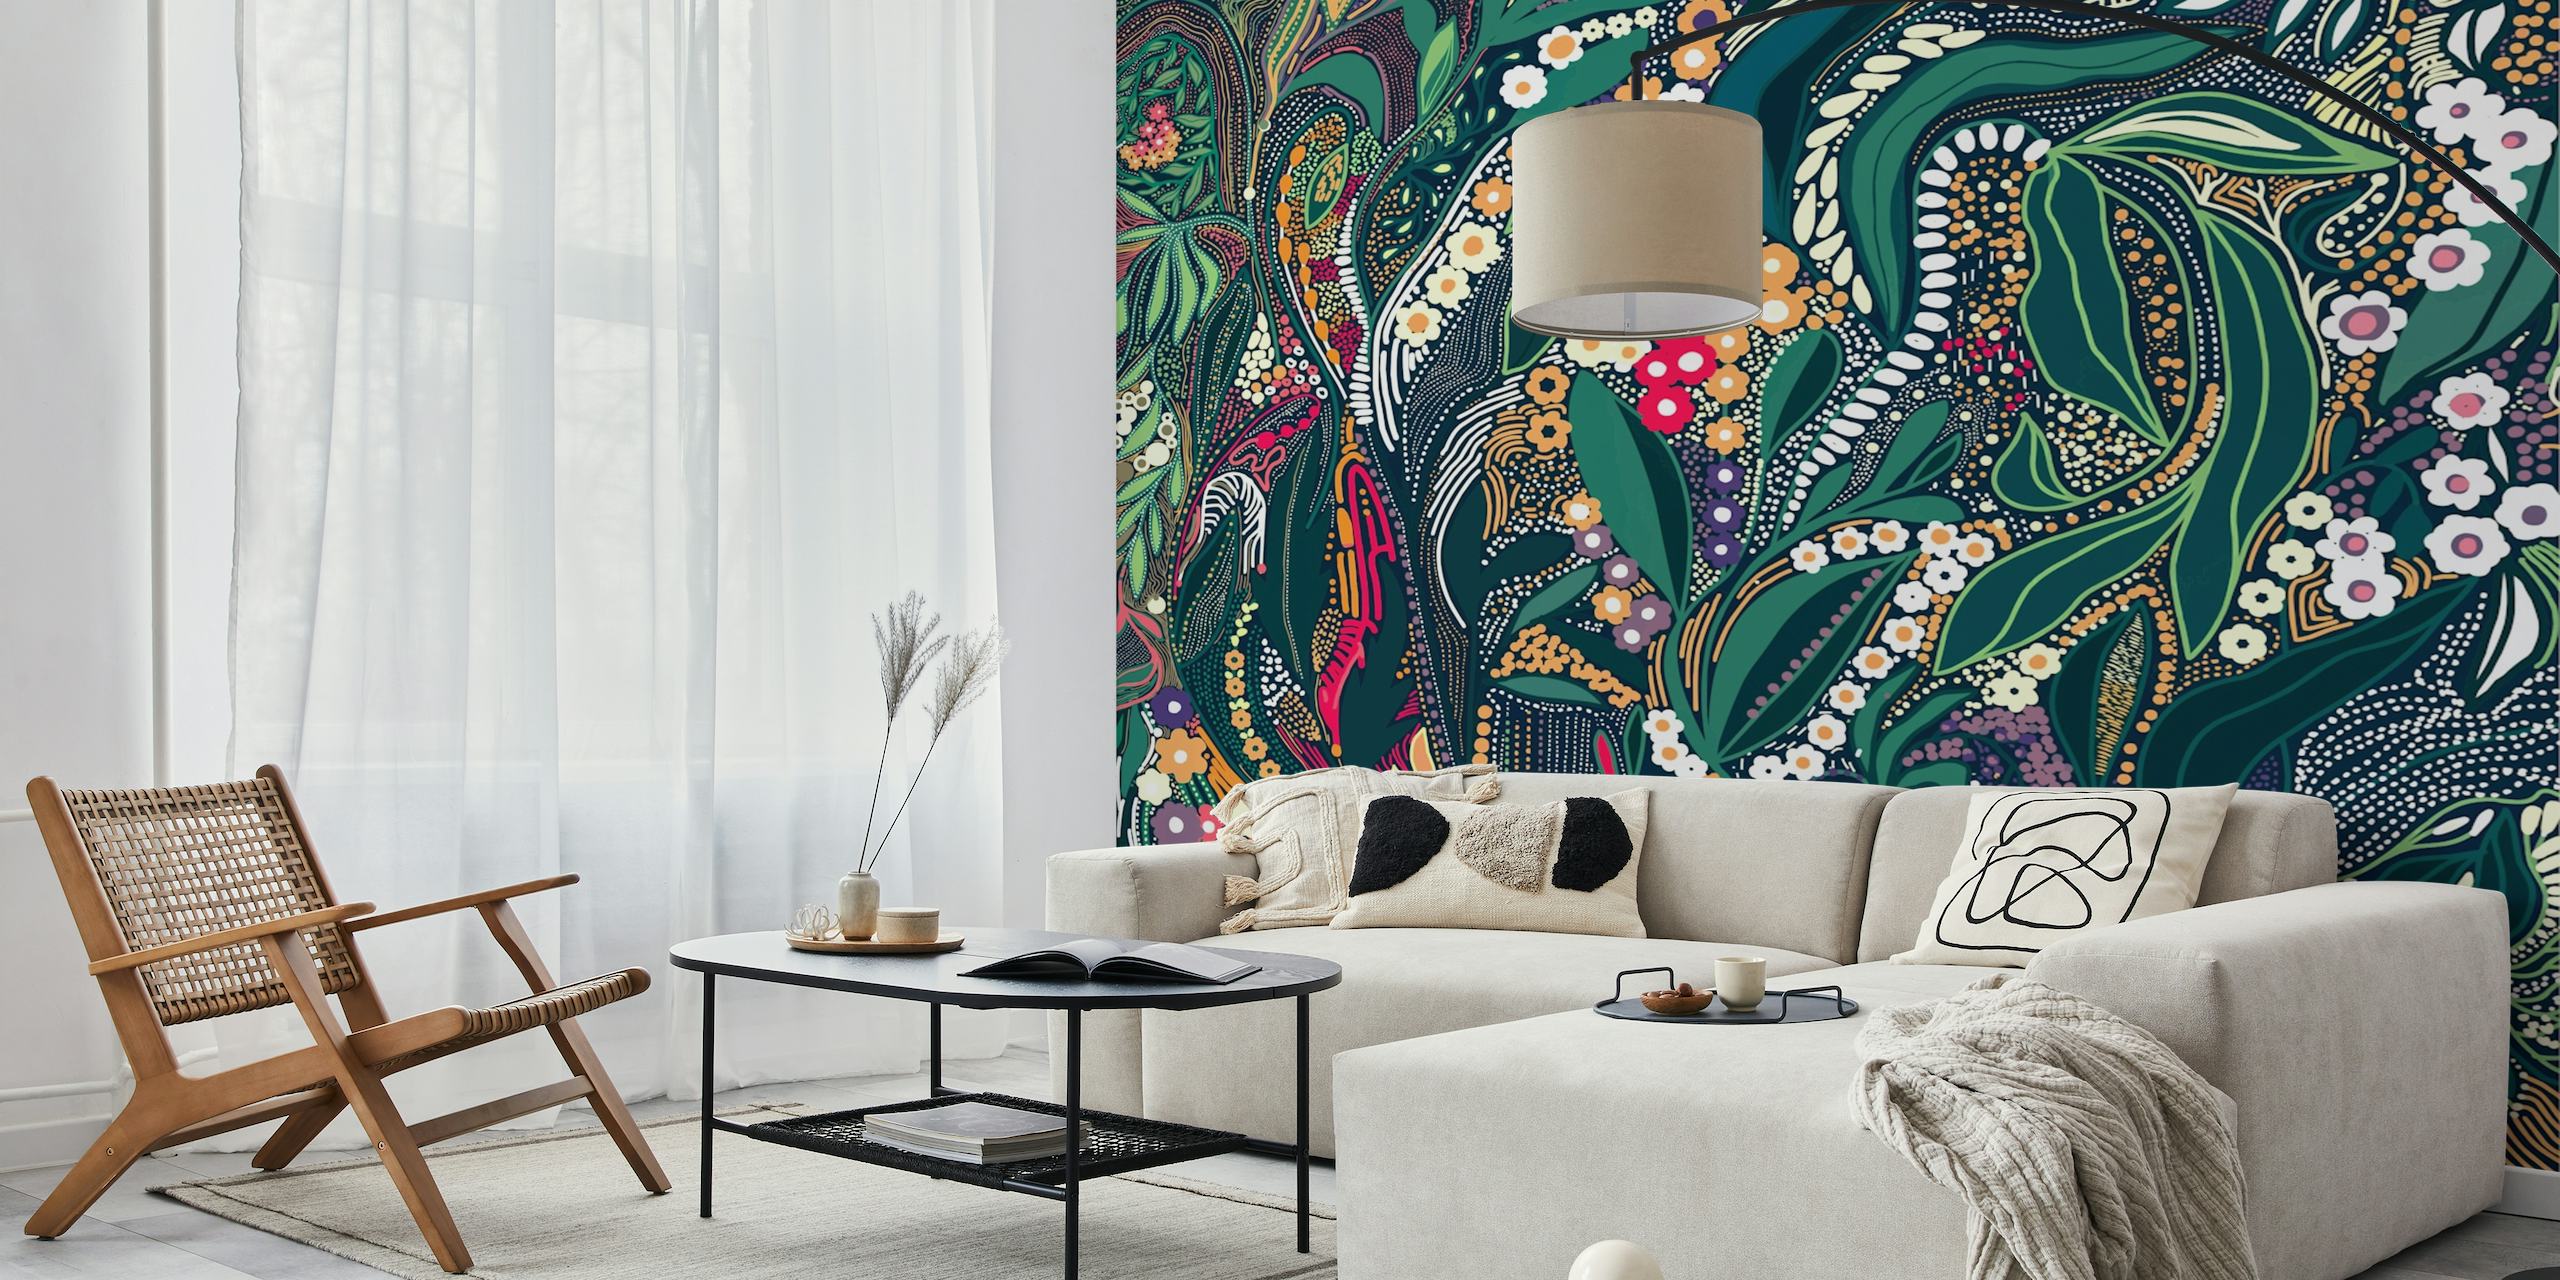 Wall mural featuring an intricate design of foliage, flowers, and patterns in lush colors.